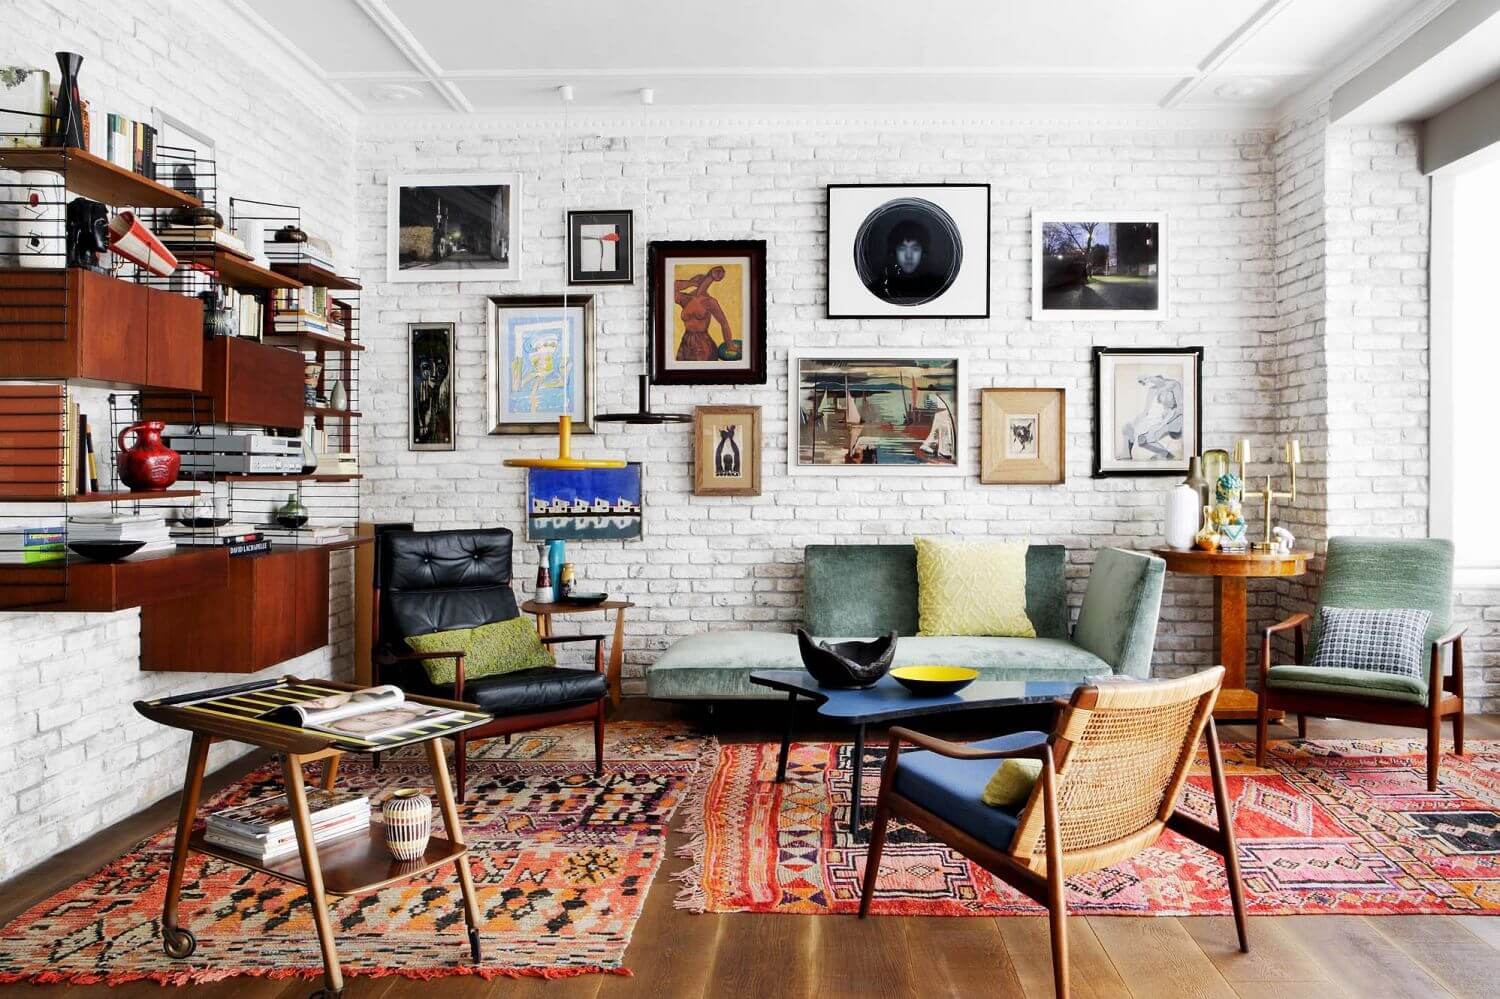 Your Guide To Bohemian Design & Our Favorite Bohemian Rugs To Complete The Look